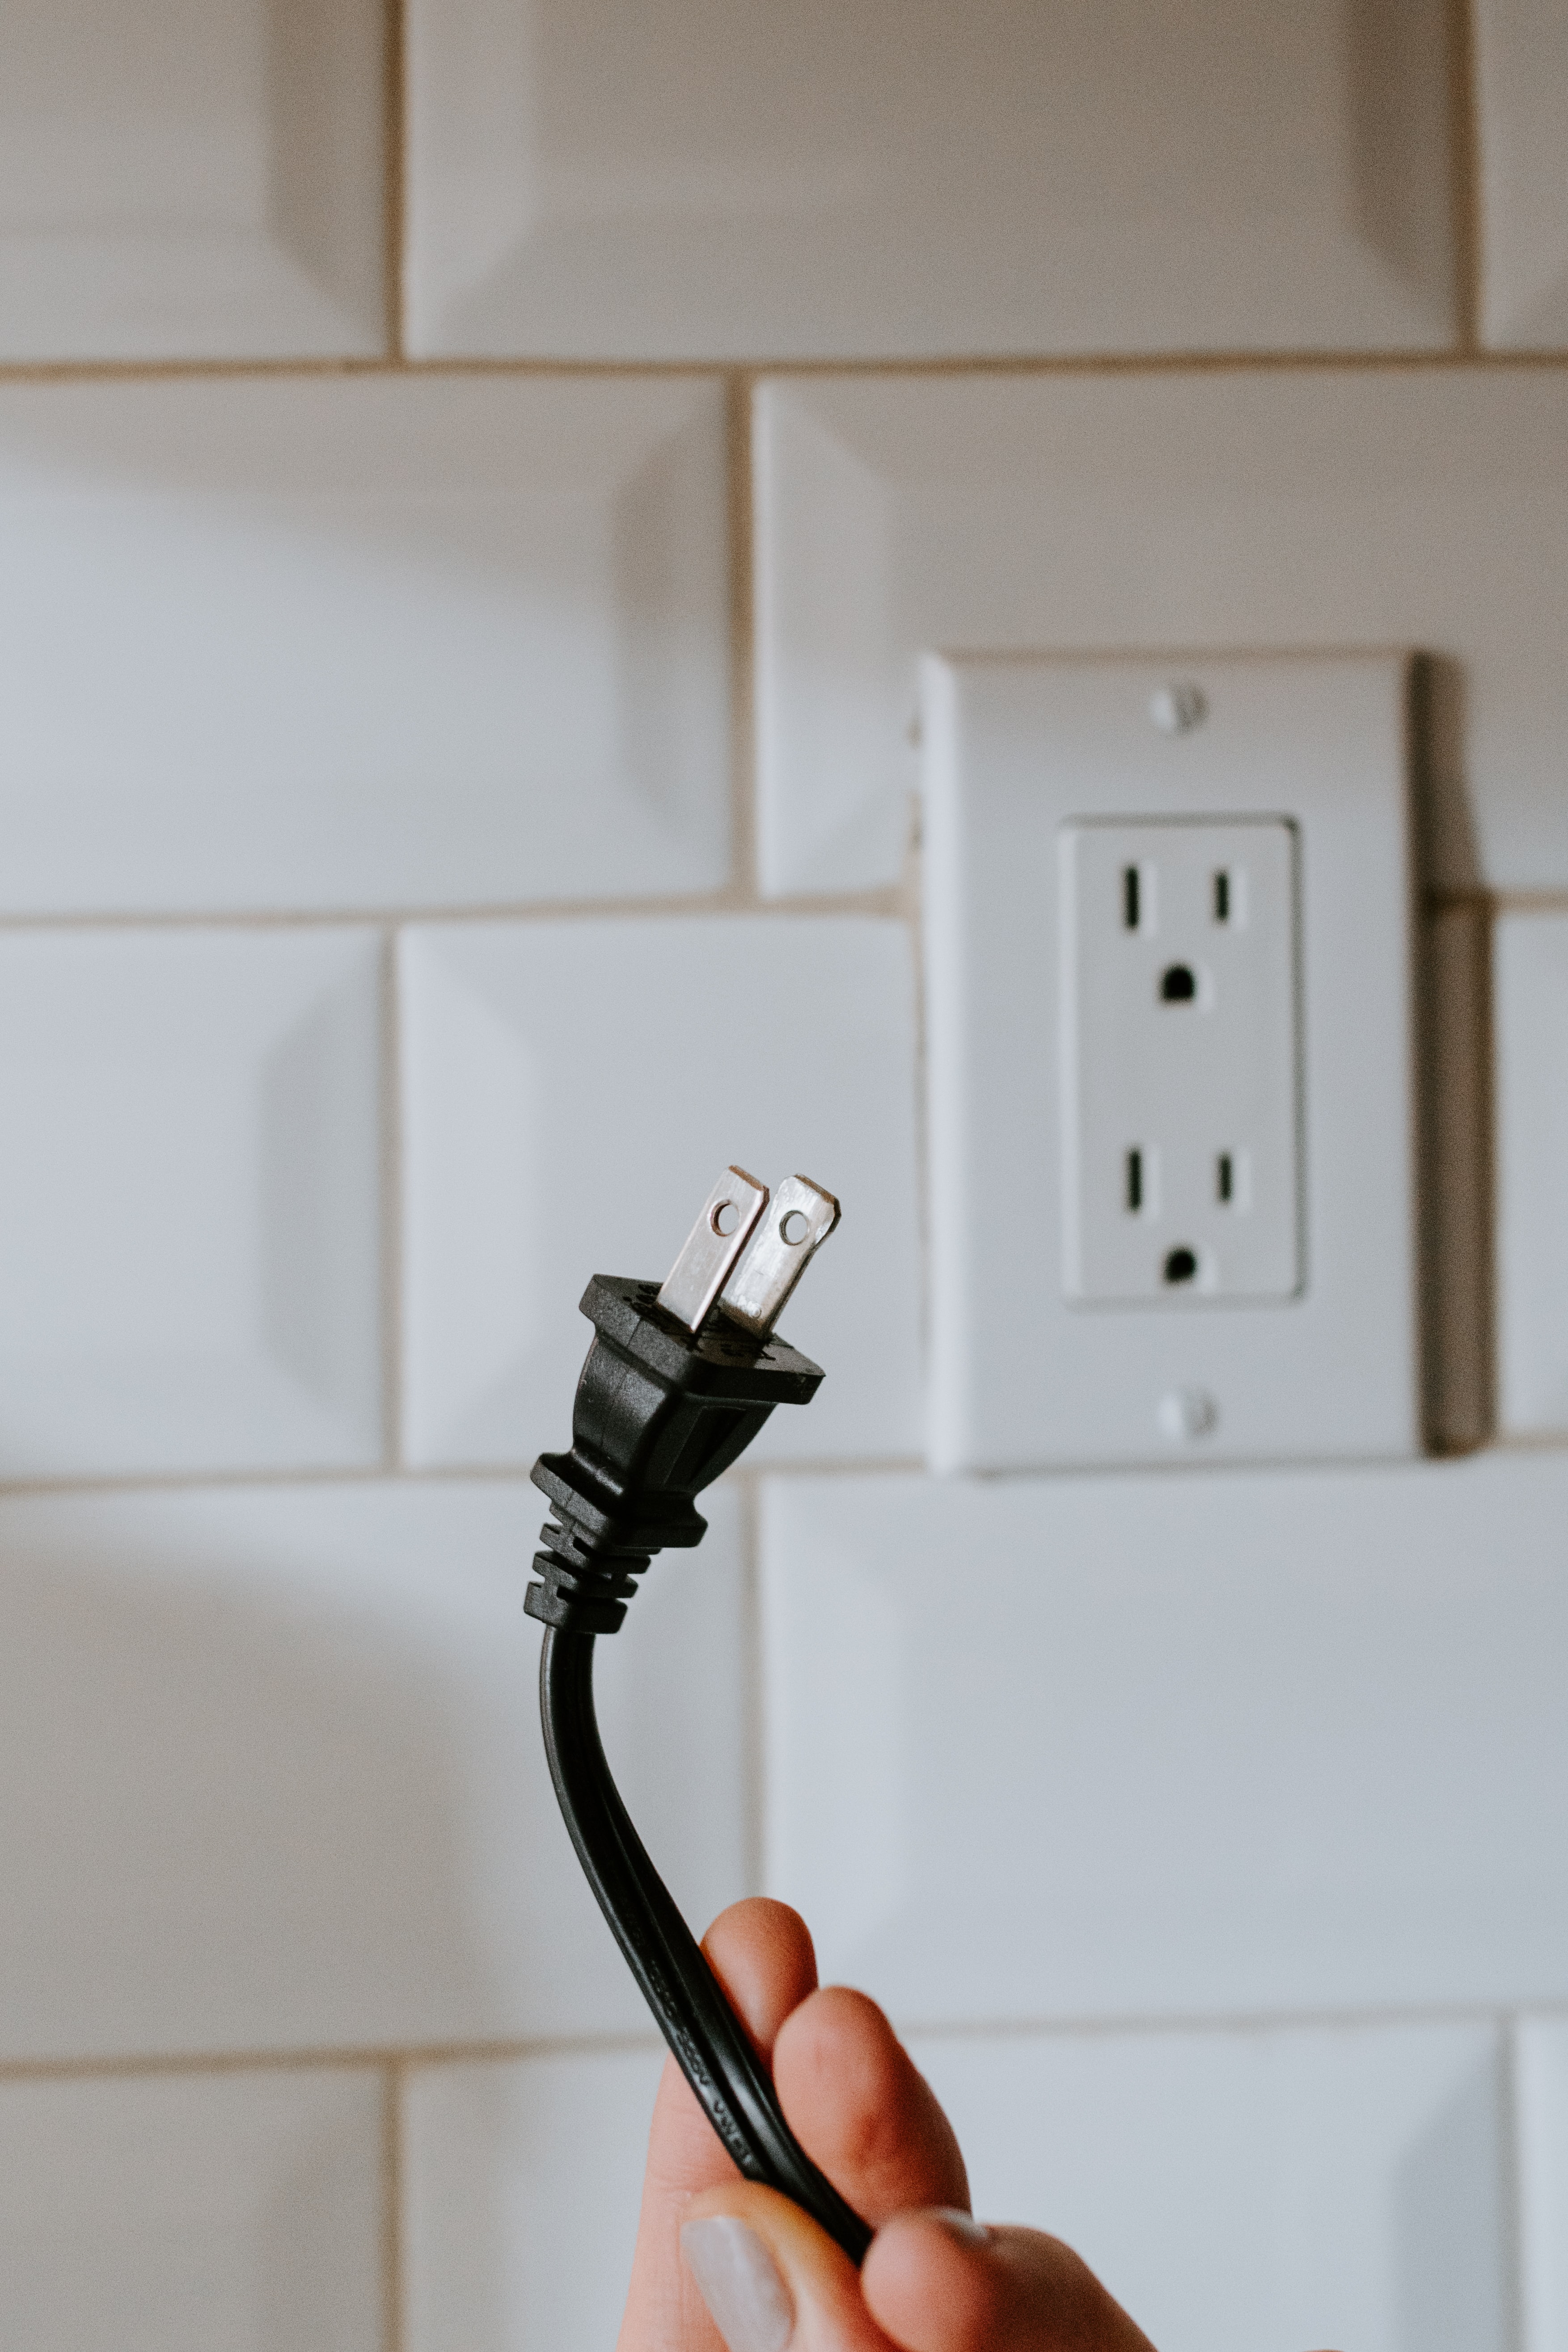 Pic of a plug disconnected from a socket